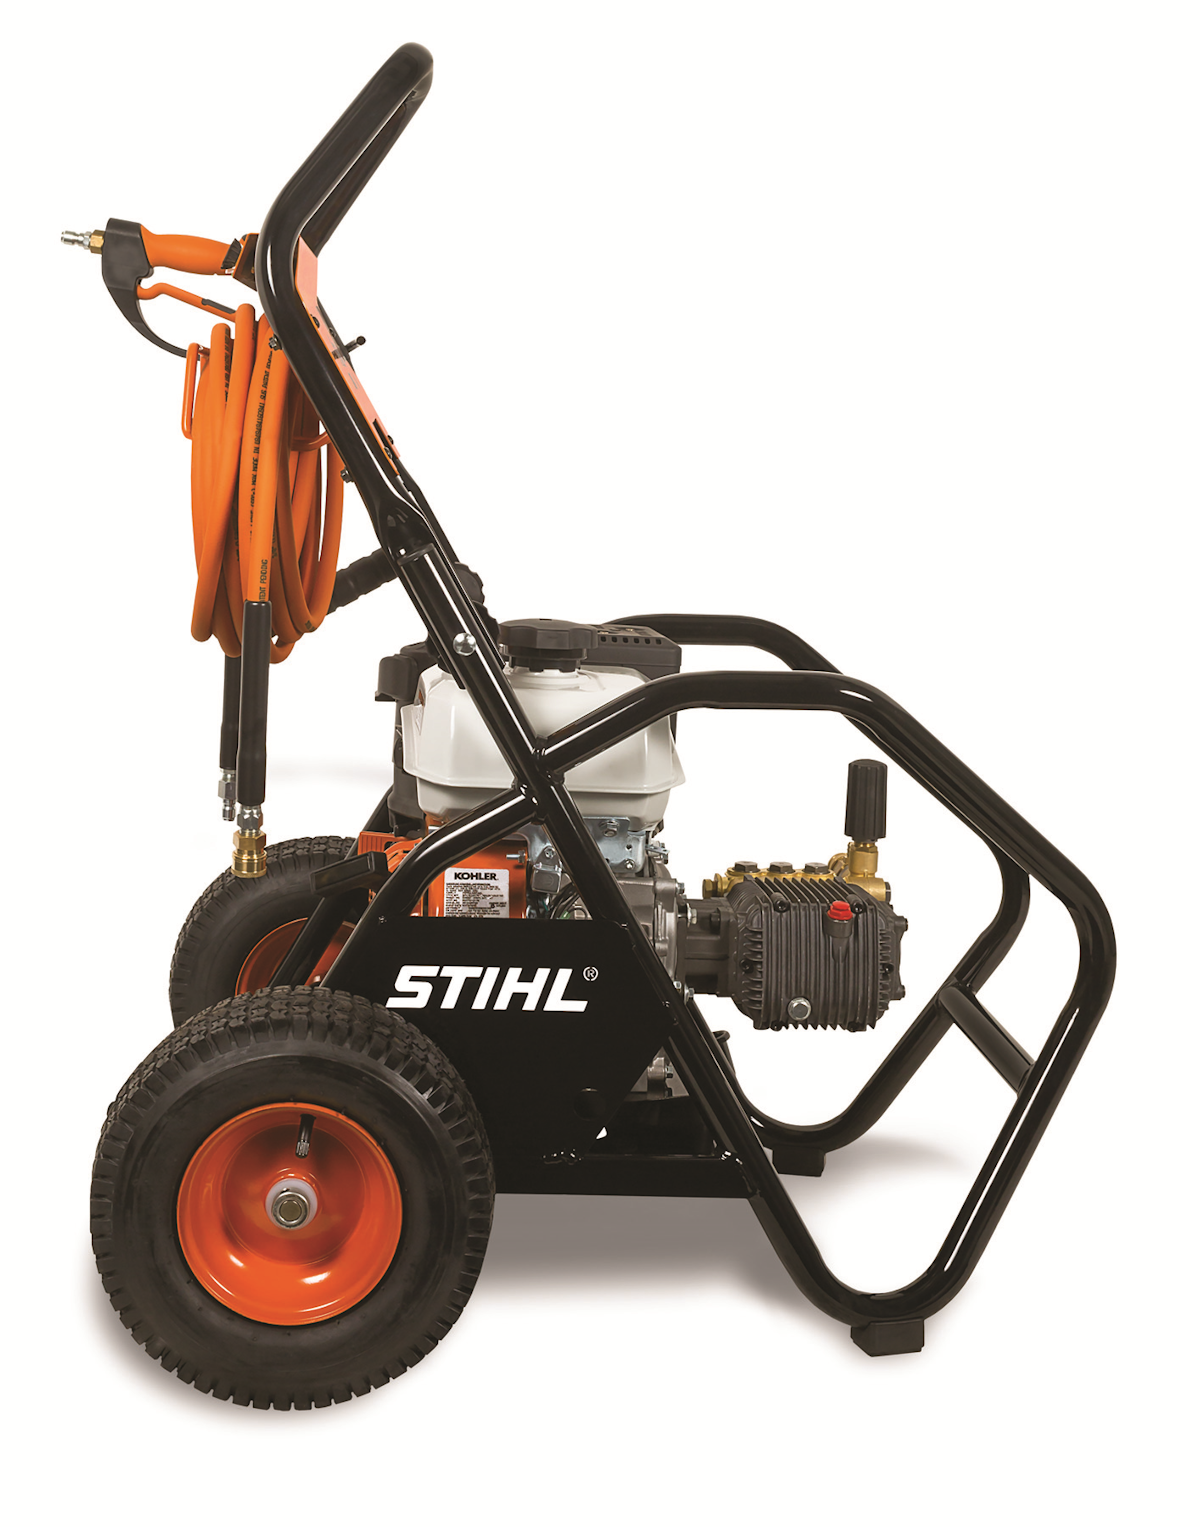 Stihl S Rb 600 Rb 800 Gasoline Powered Pressure Washers From Stihl Incorporated Green Industry Pros